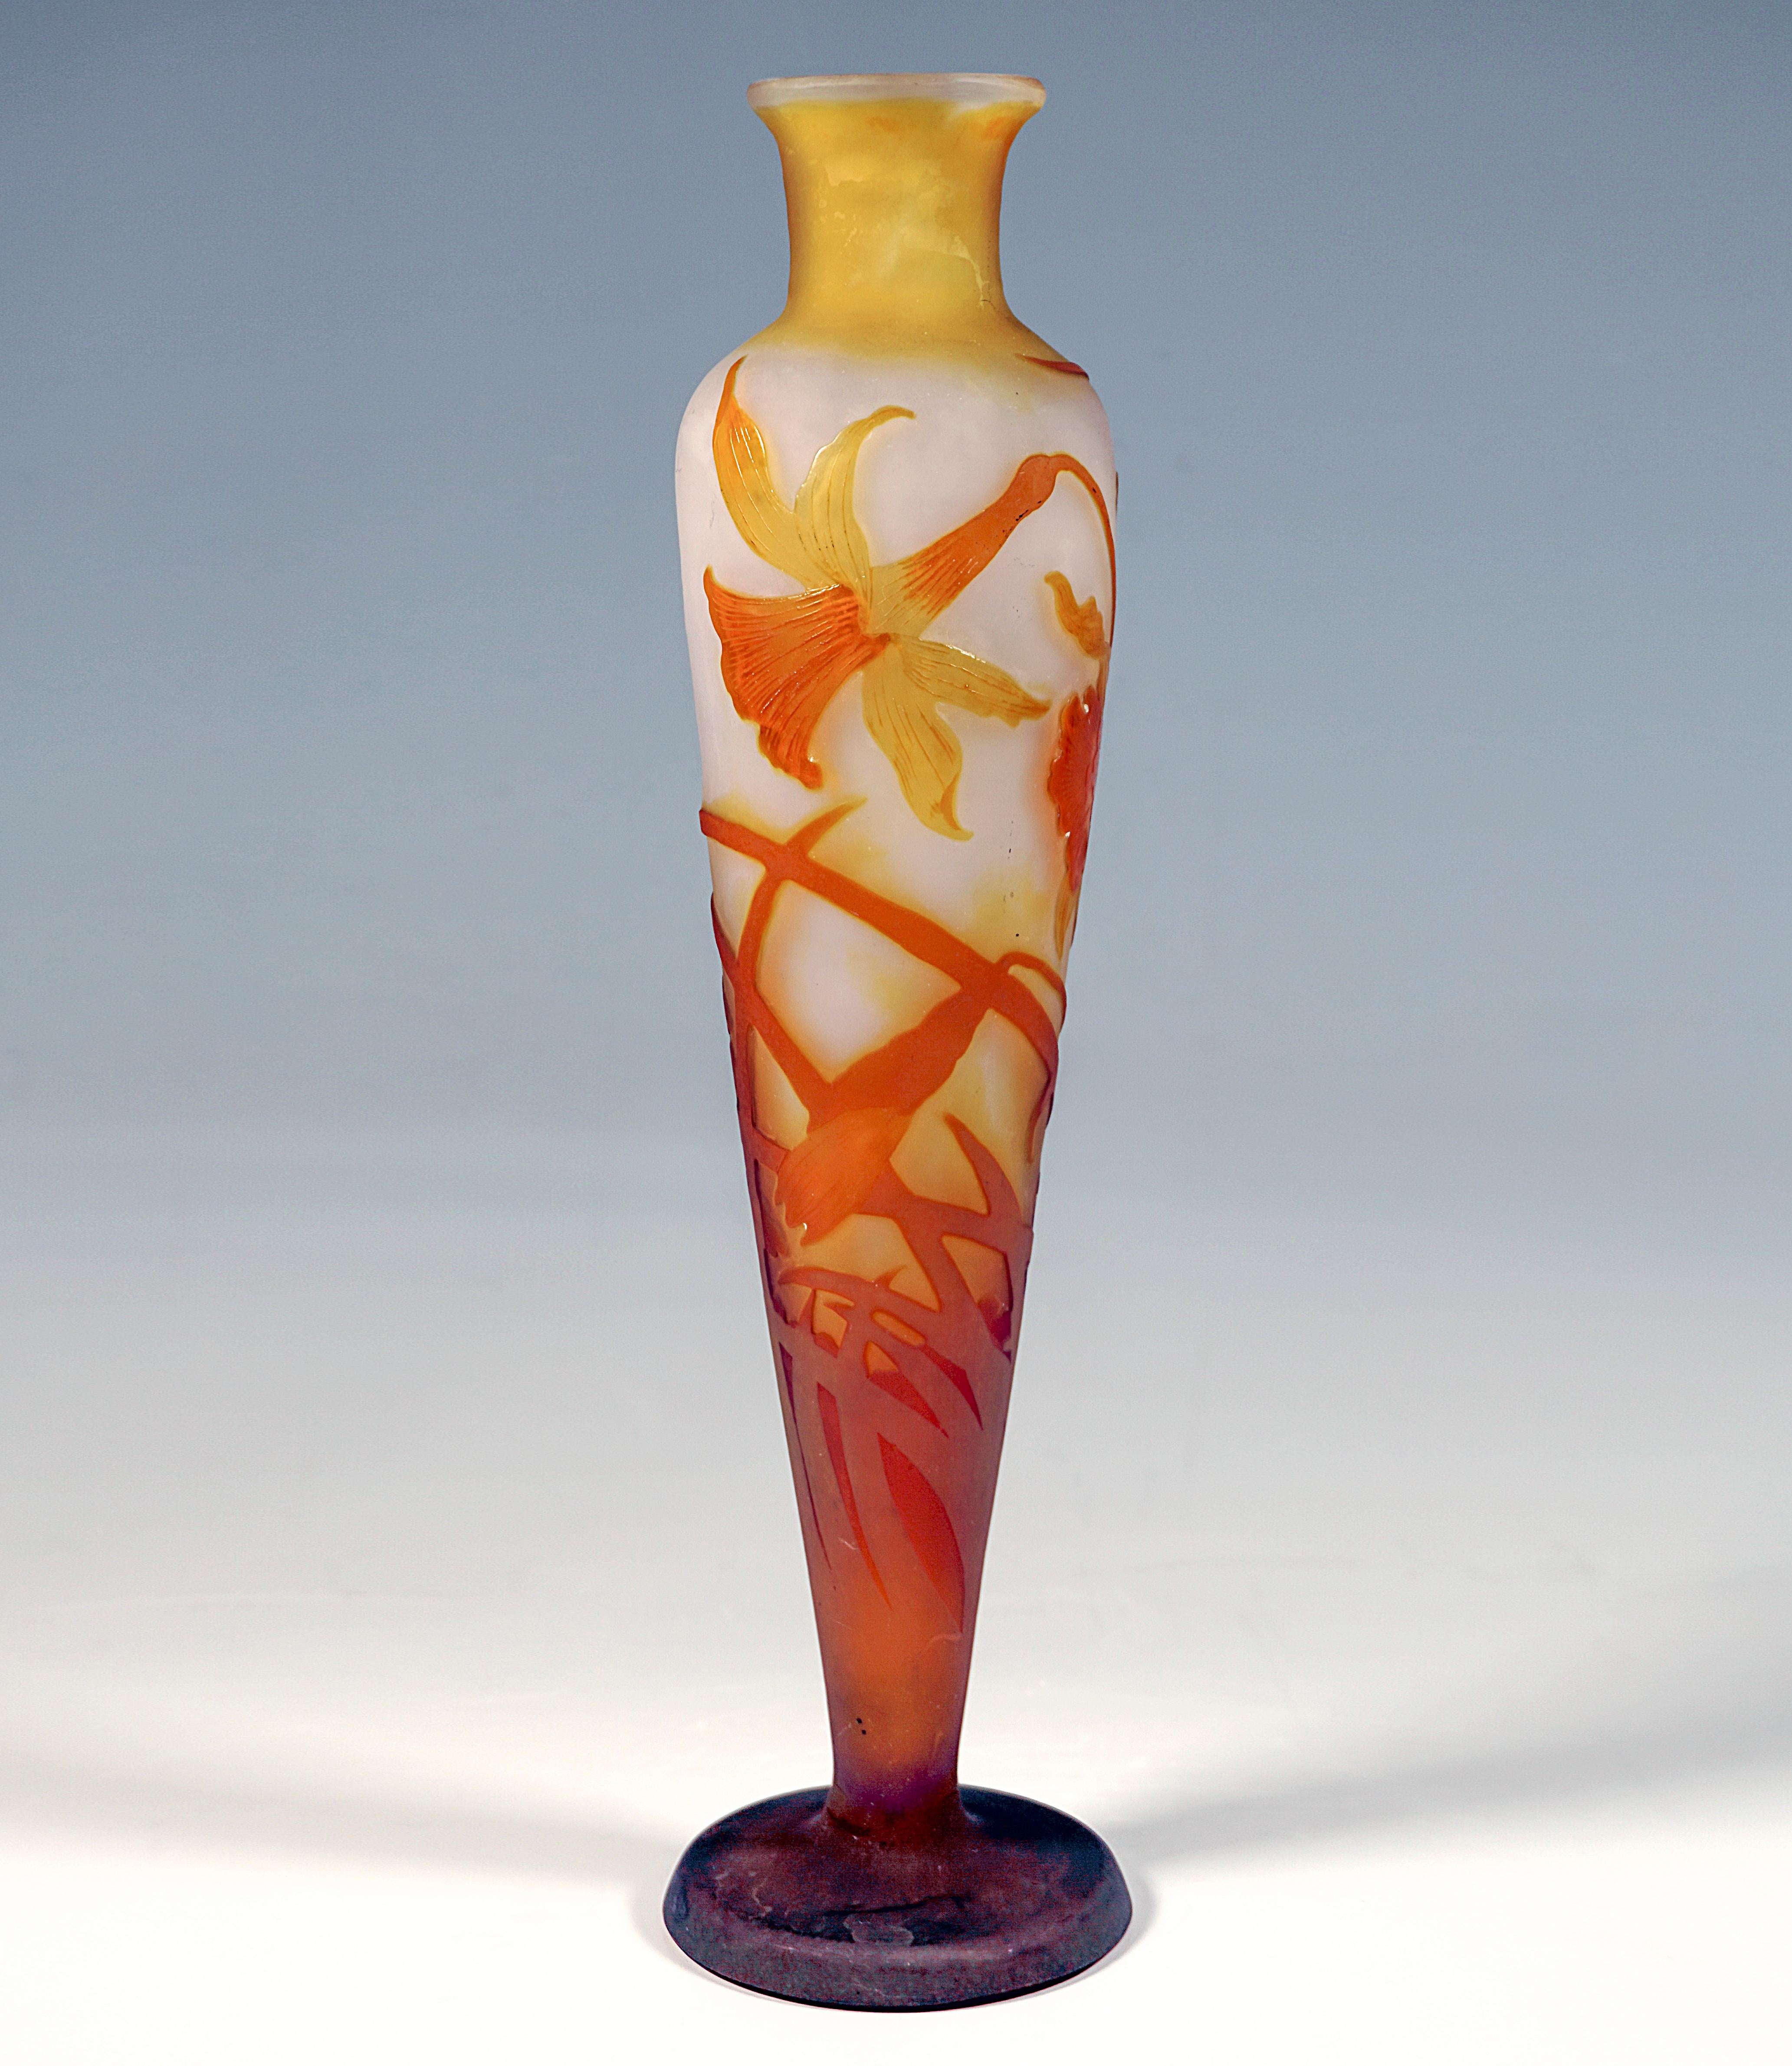 Baluster-shaped vase body on a separate, round base, conically widening walls, on rounded shoulders set short, narrow neck with slightly flared mouth rim, colorless glass with flaky white and yellow colored powder inclusions, overlay in